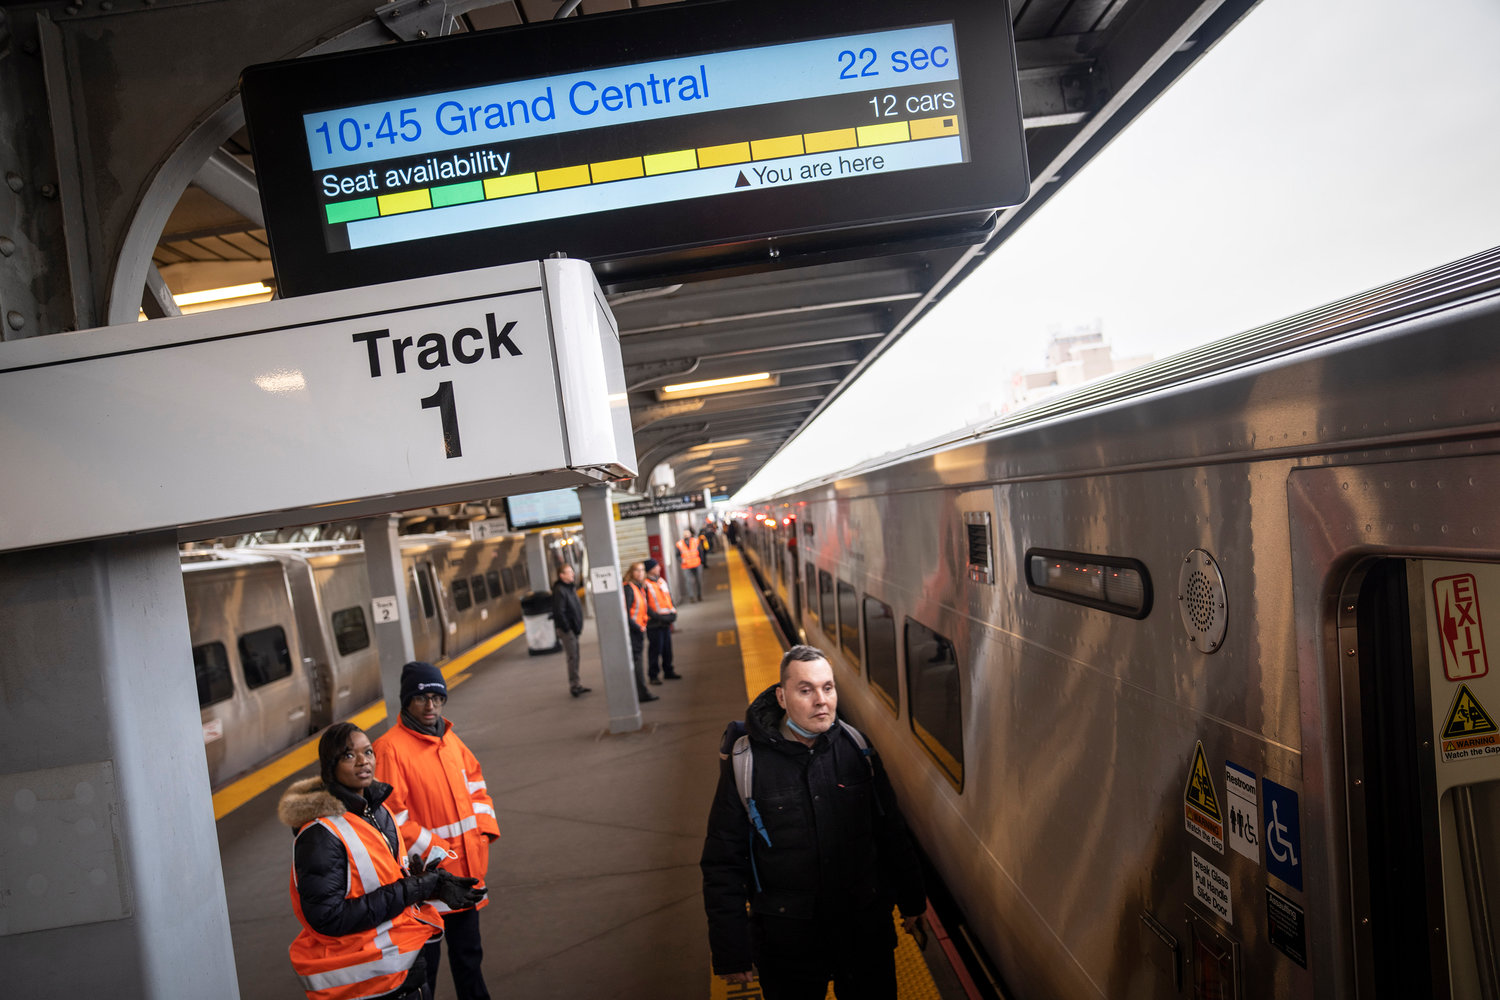 A passenger rushes to board a Long Island Rail Road train before it departs for an inaugural trip from Jamaica station towards Grand Central Terminal, Wednesday, Jan. 25, 2023, in the Queens borough of New York. After years of delays and massive cost overruns, one of the world's most expensive railway projects has begun shuttling its first passengers between Long Island to the latest addition to New York City's iconic Grand Central Terminal, dubbed Grand Central Madison because of its location along Madison Avenue. (AP Photo/John Minchillo)